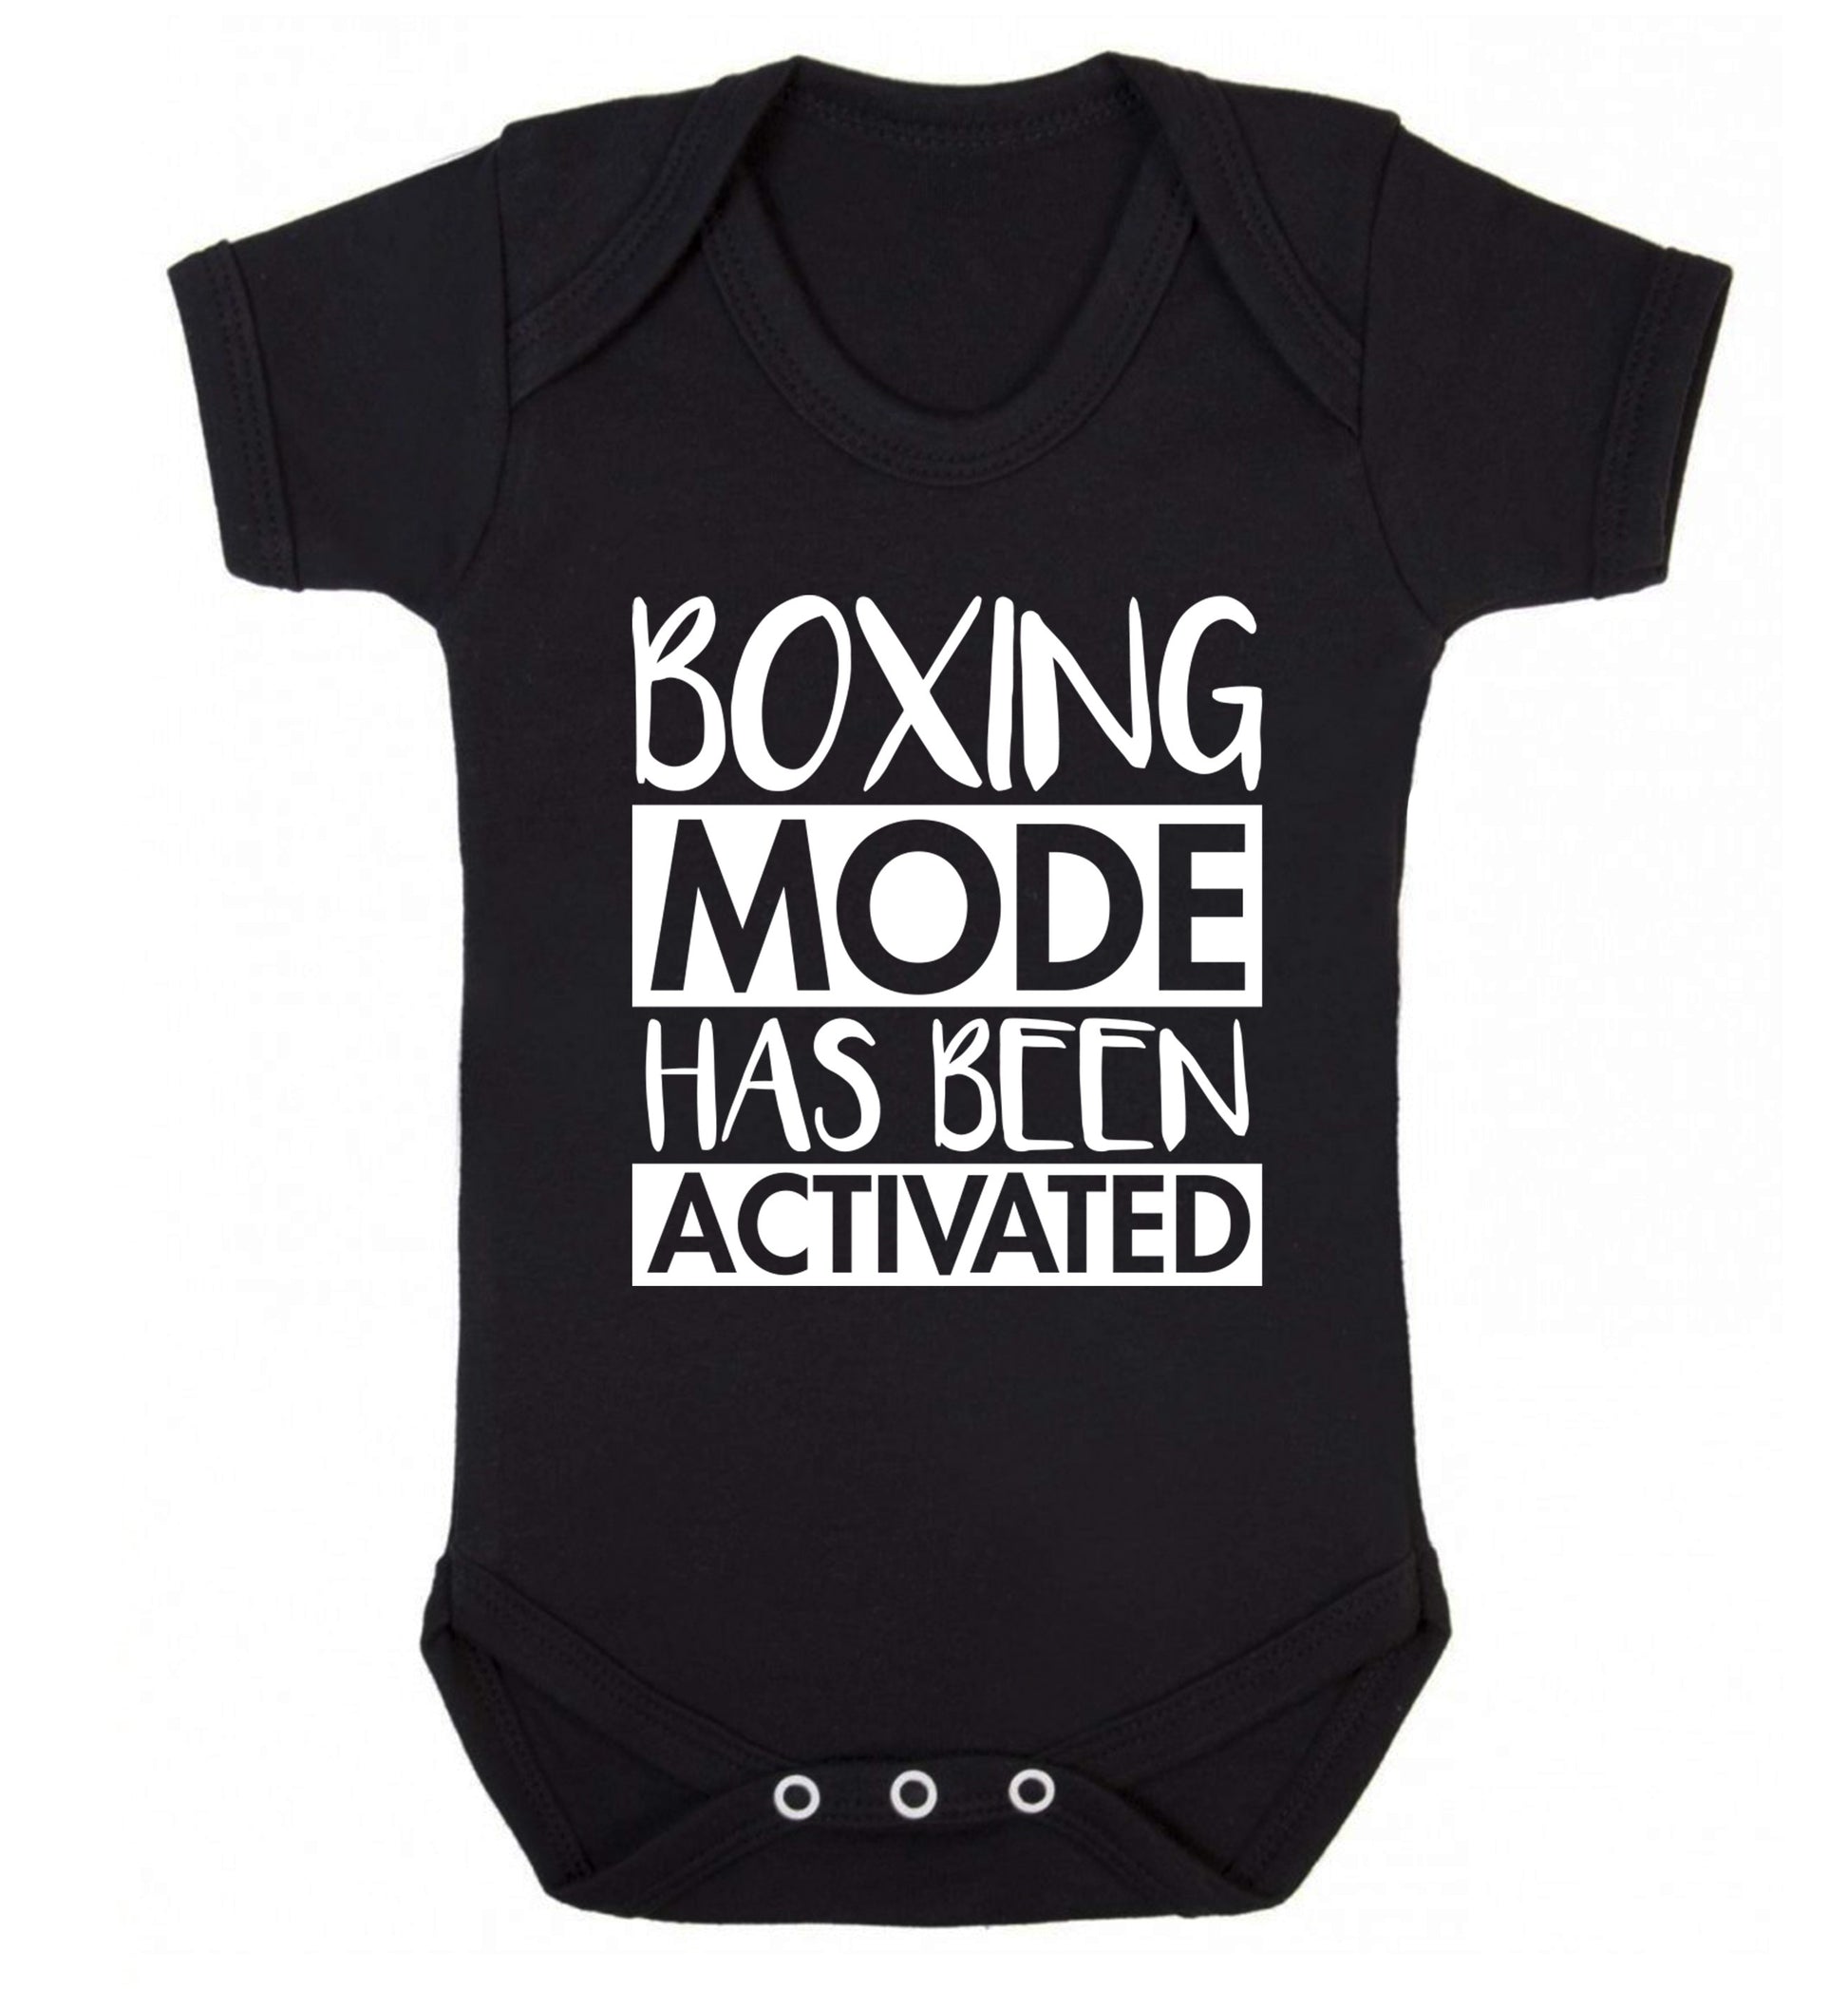 Boxing mode activated Baby Vest black 18-24 months